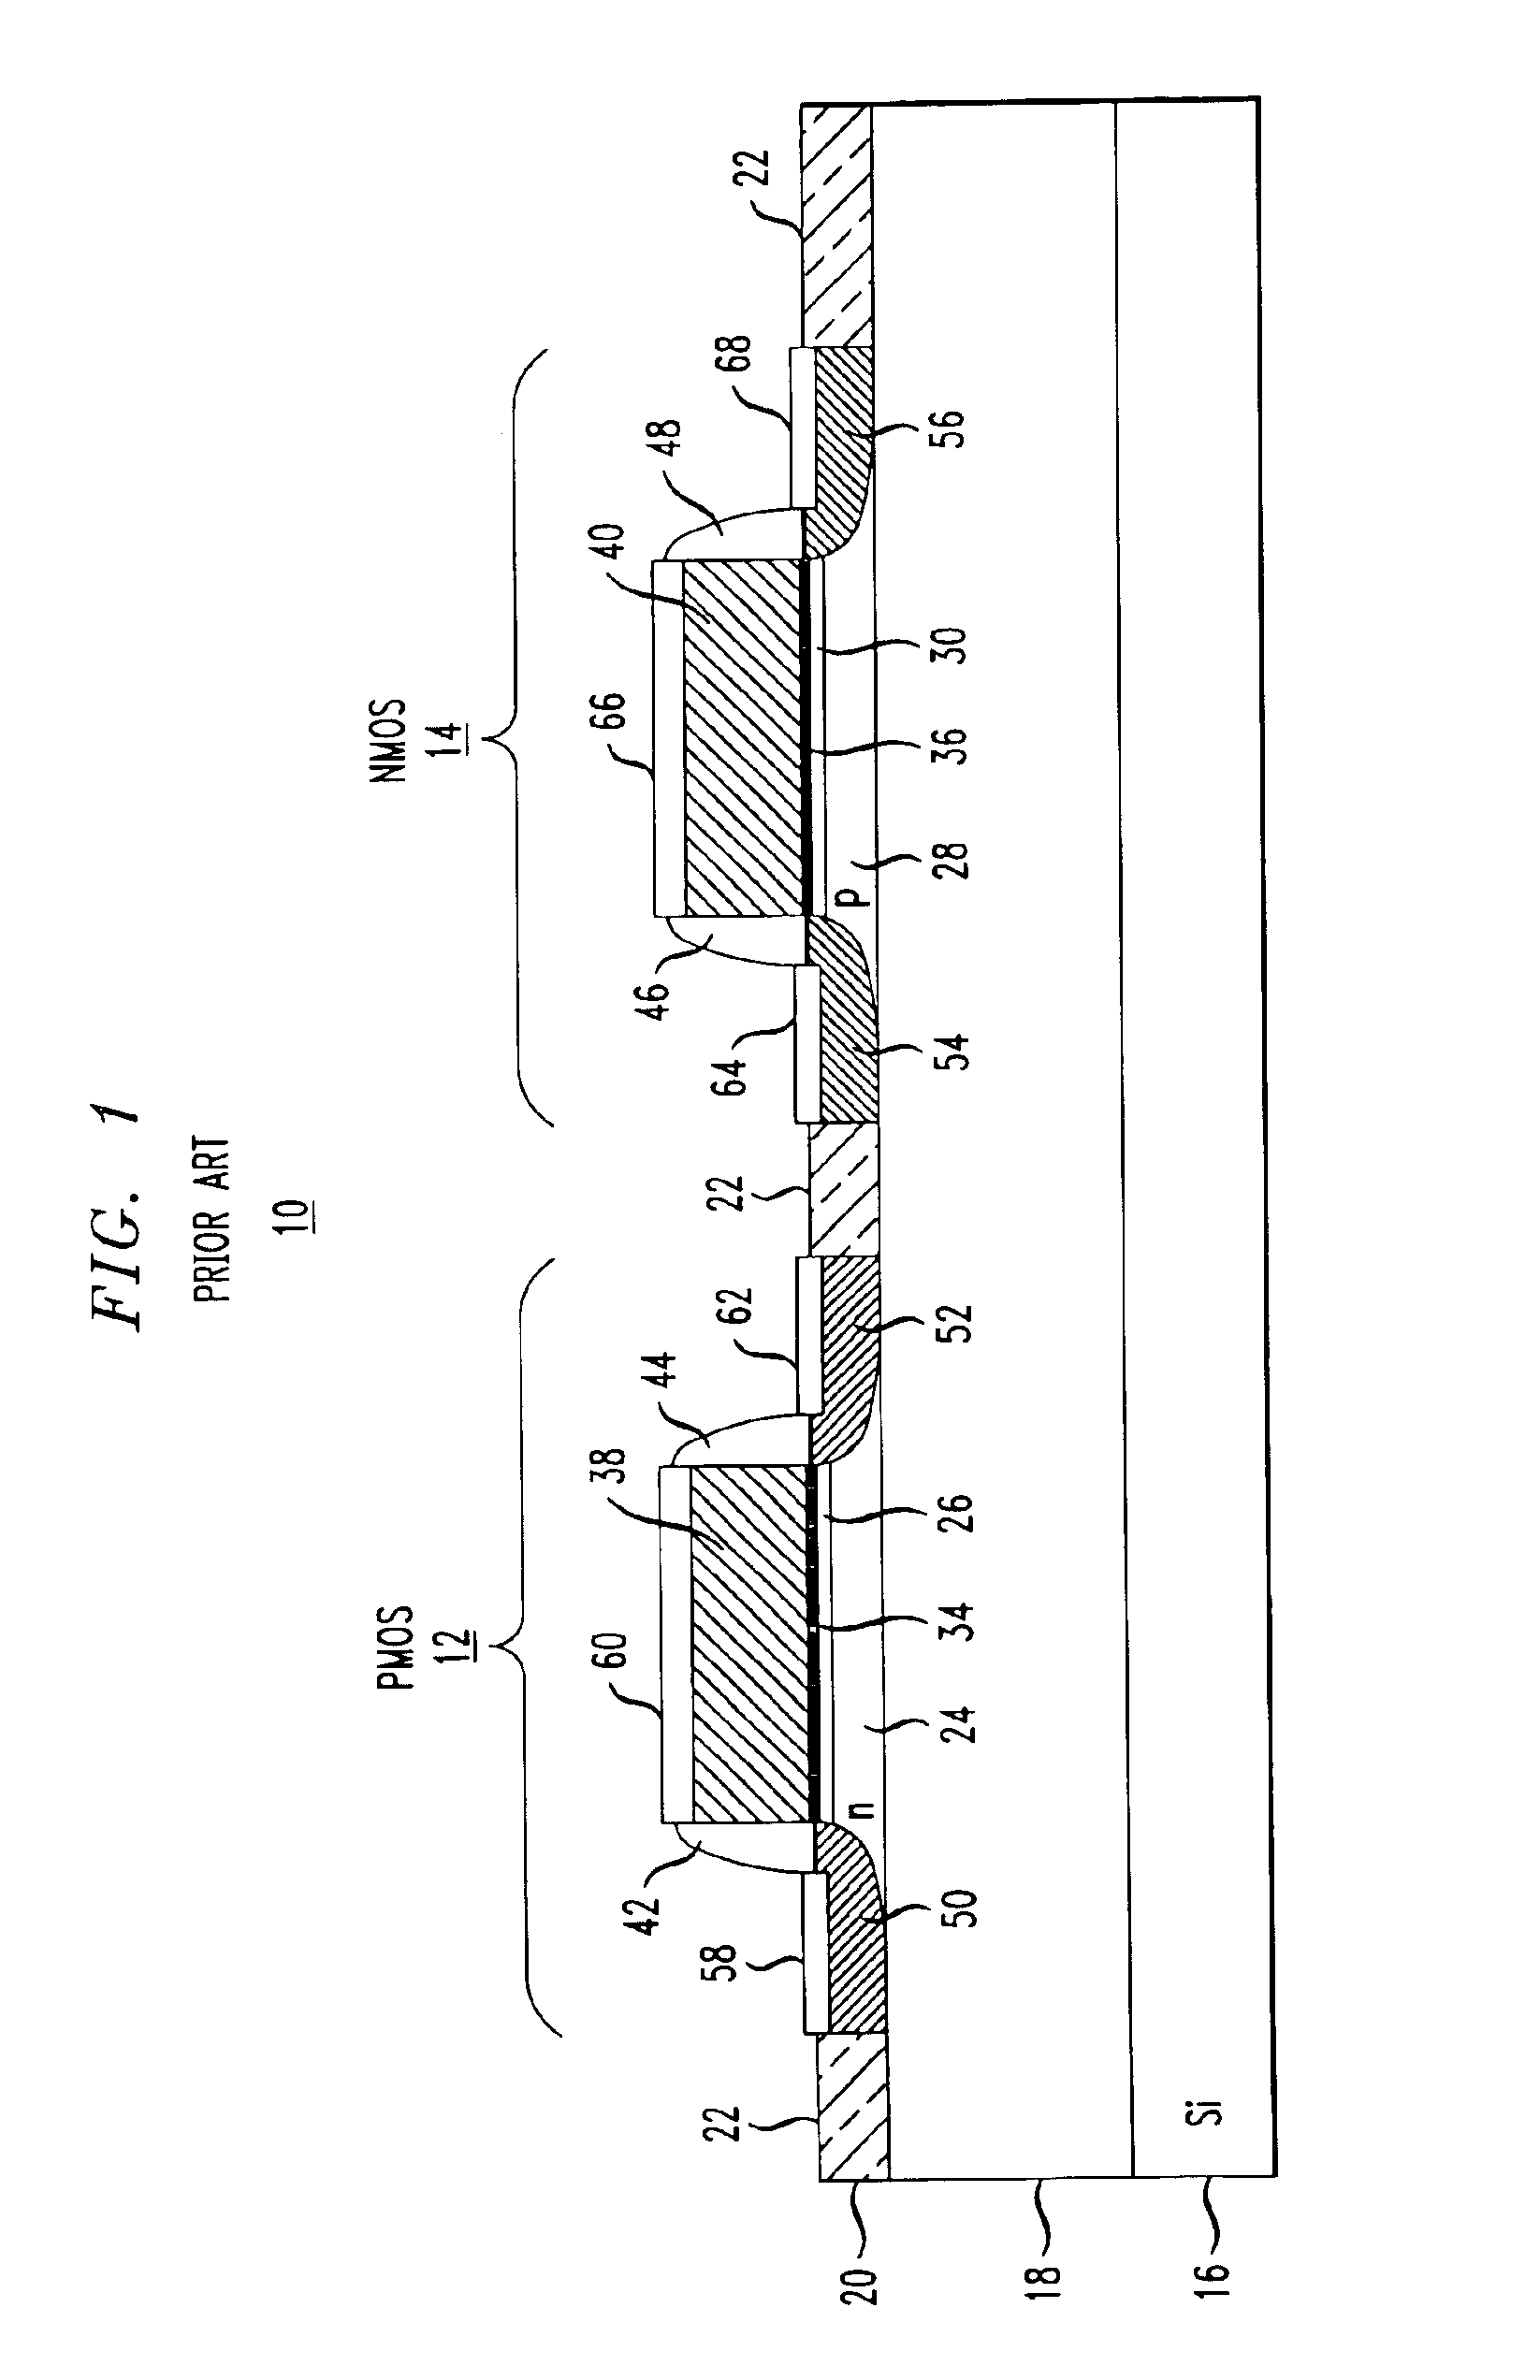 CMOS-compatible integration of silicon-based optical devices with electronic devices